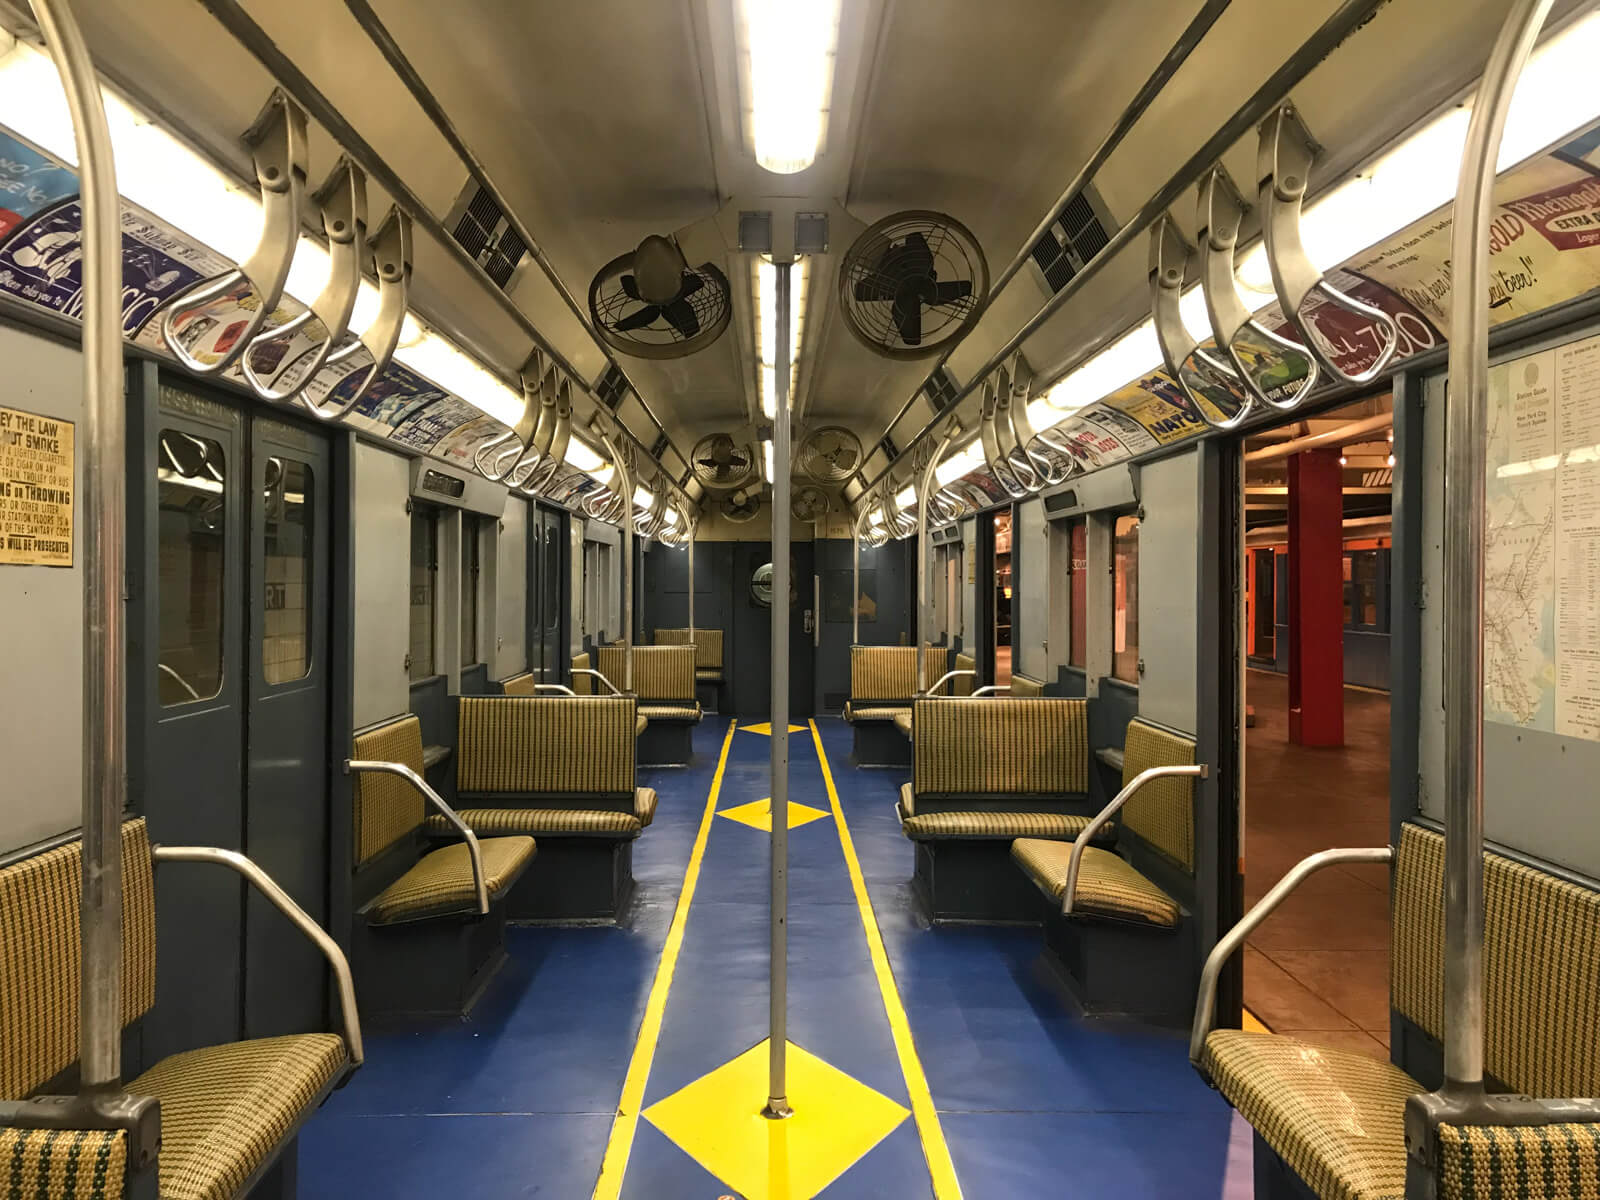 The inside of a different train carriage with a blue and yellow floor